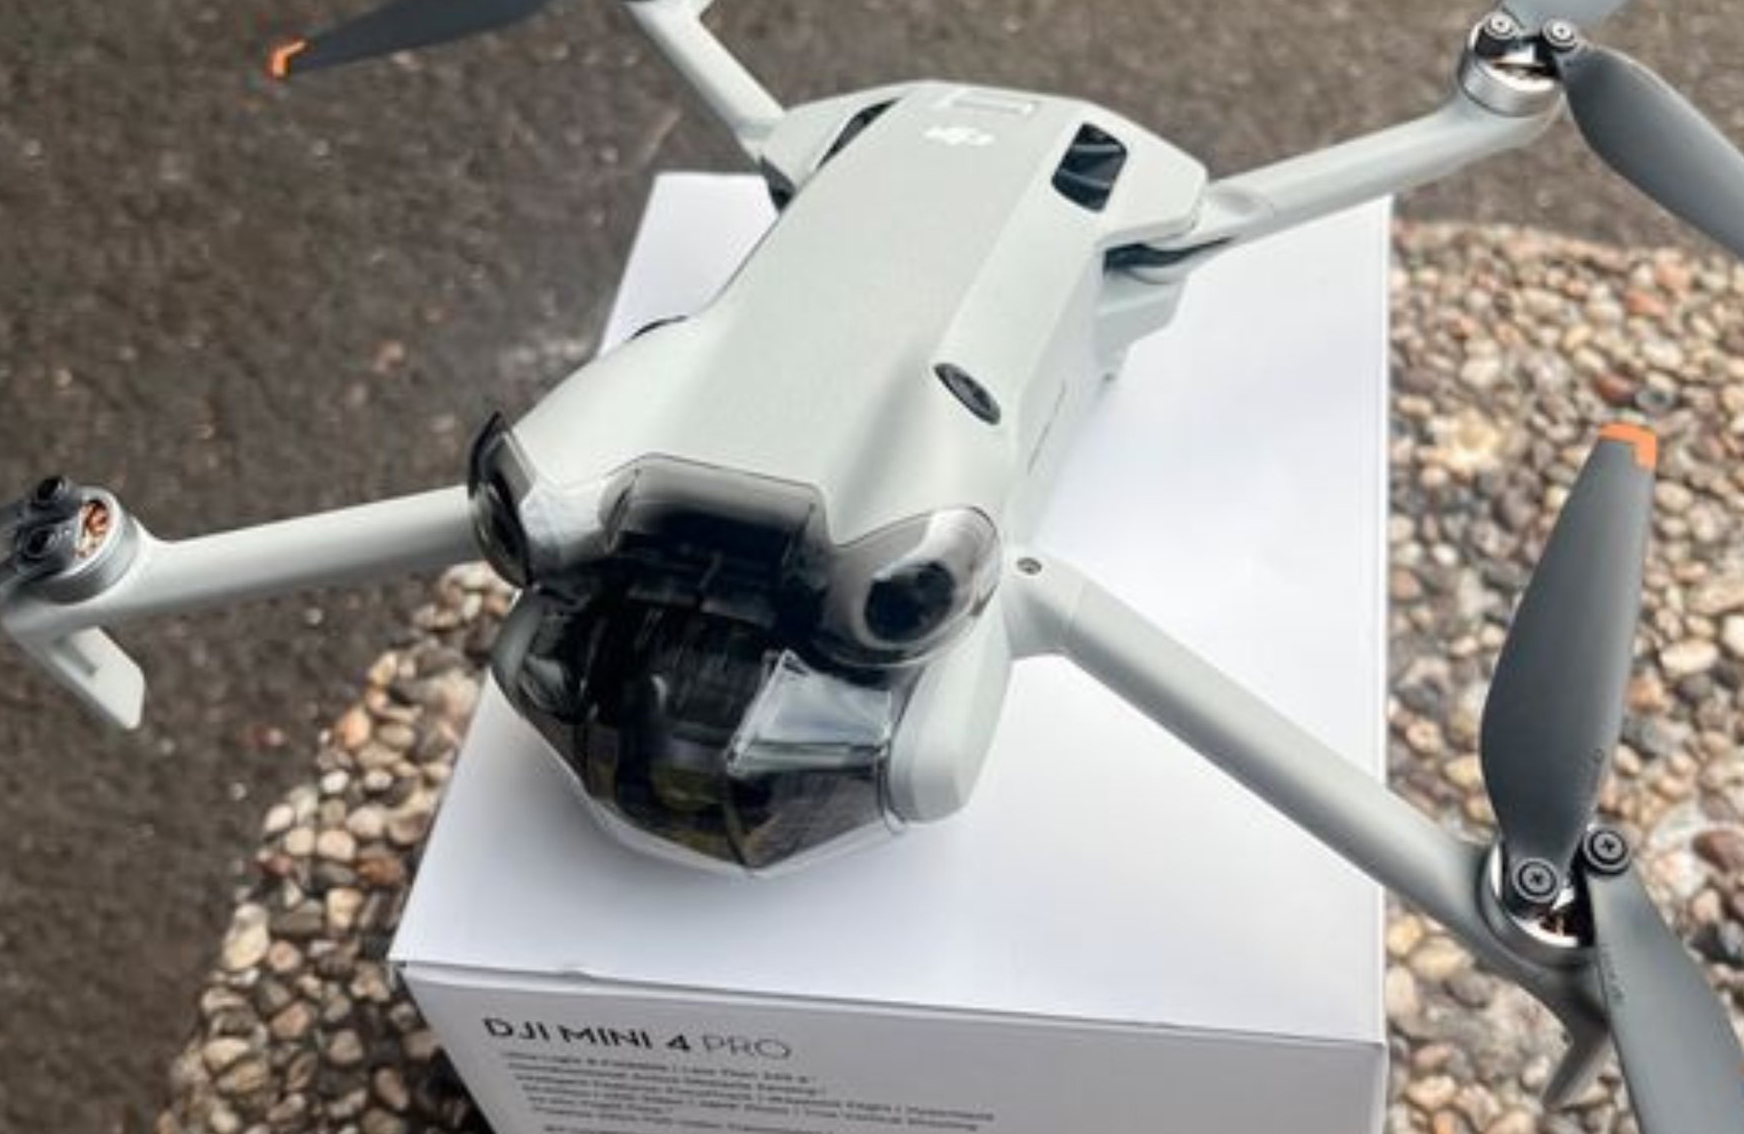 New DJI pro camera spotted in the wild for the first time